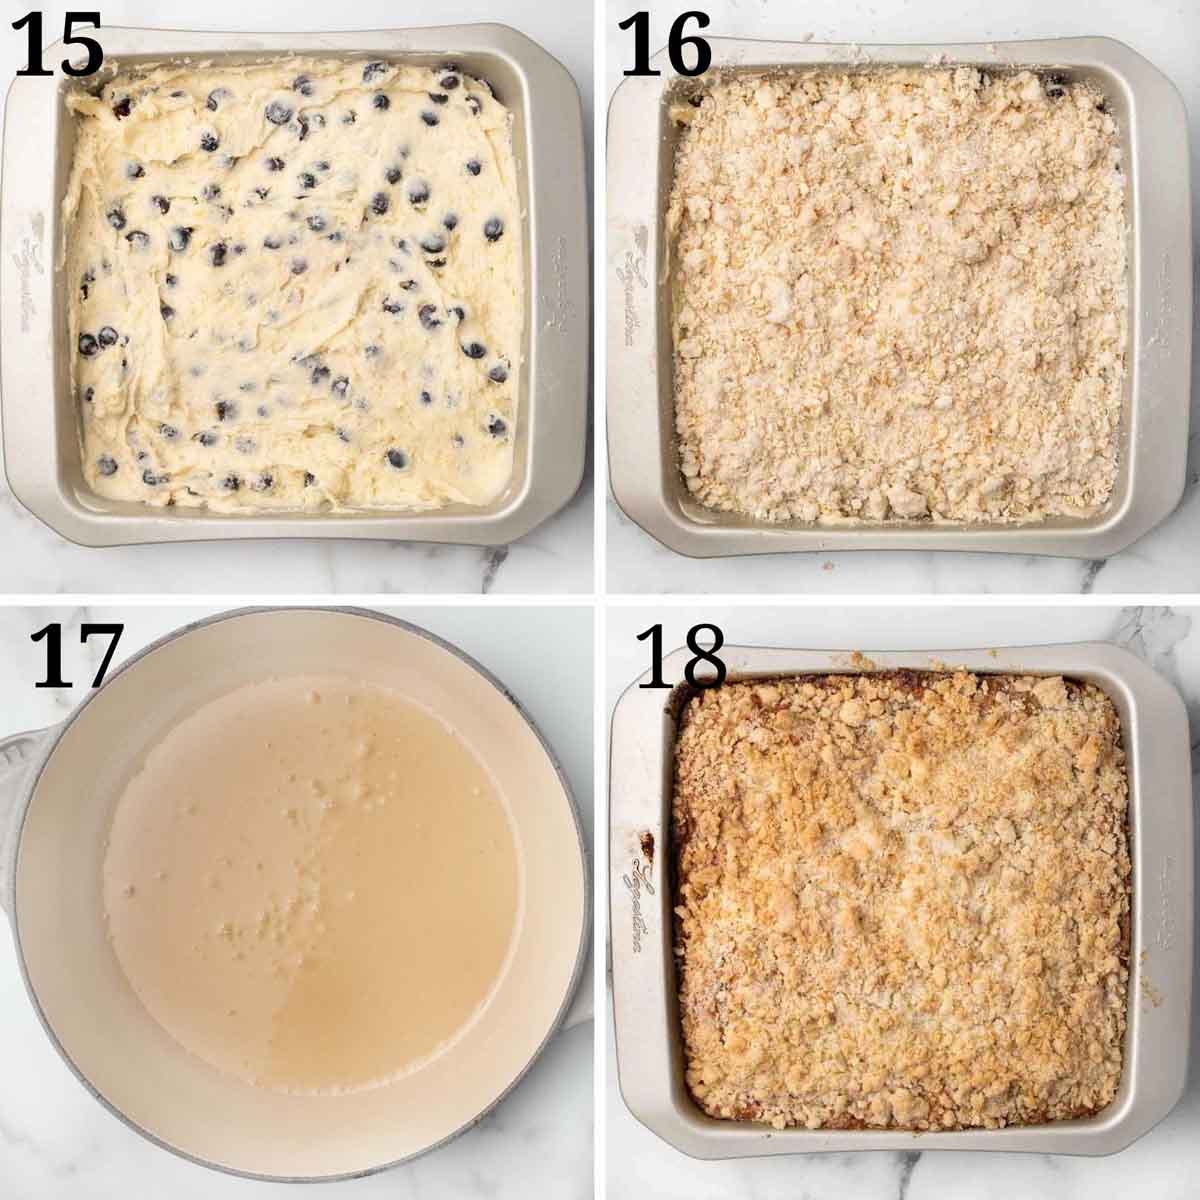 four images showing the last steps in making a blueberry buckle